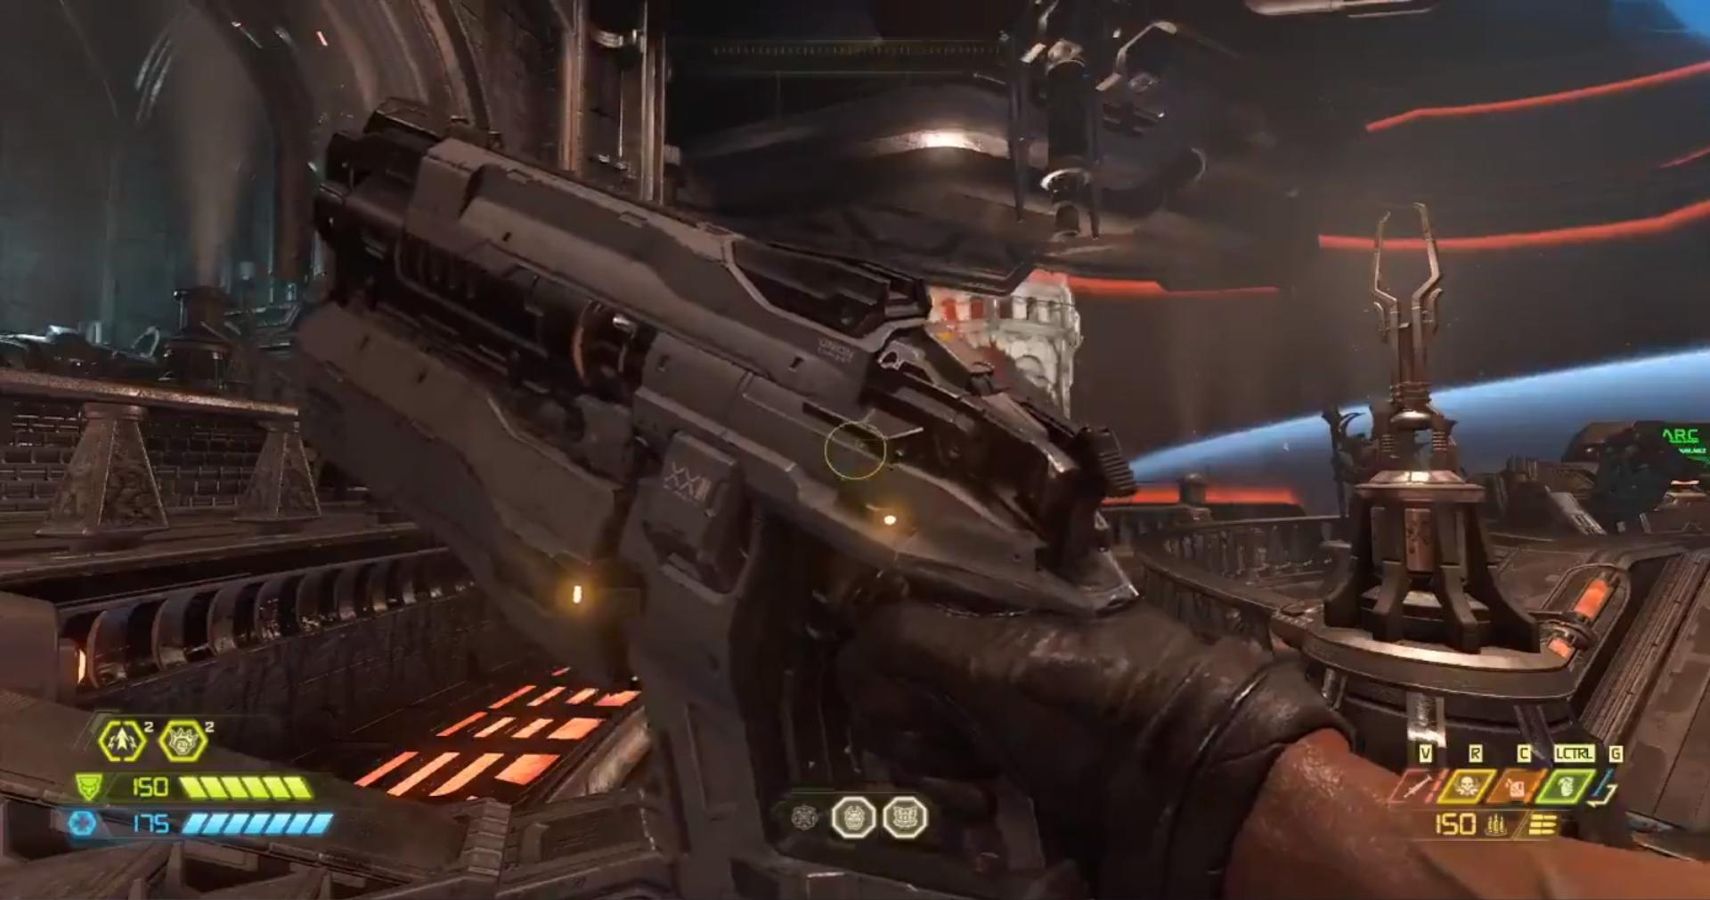 DOOM Eternal Still Has A Pistol You Just Have To Cheat For It